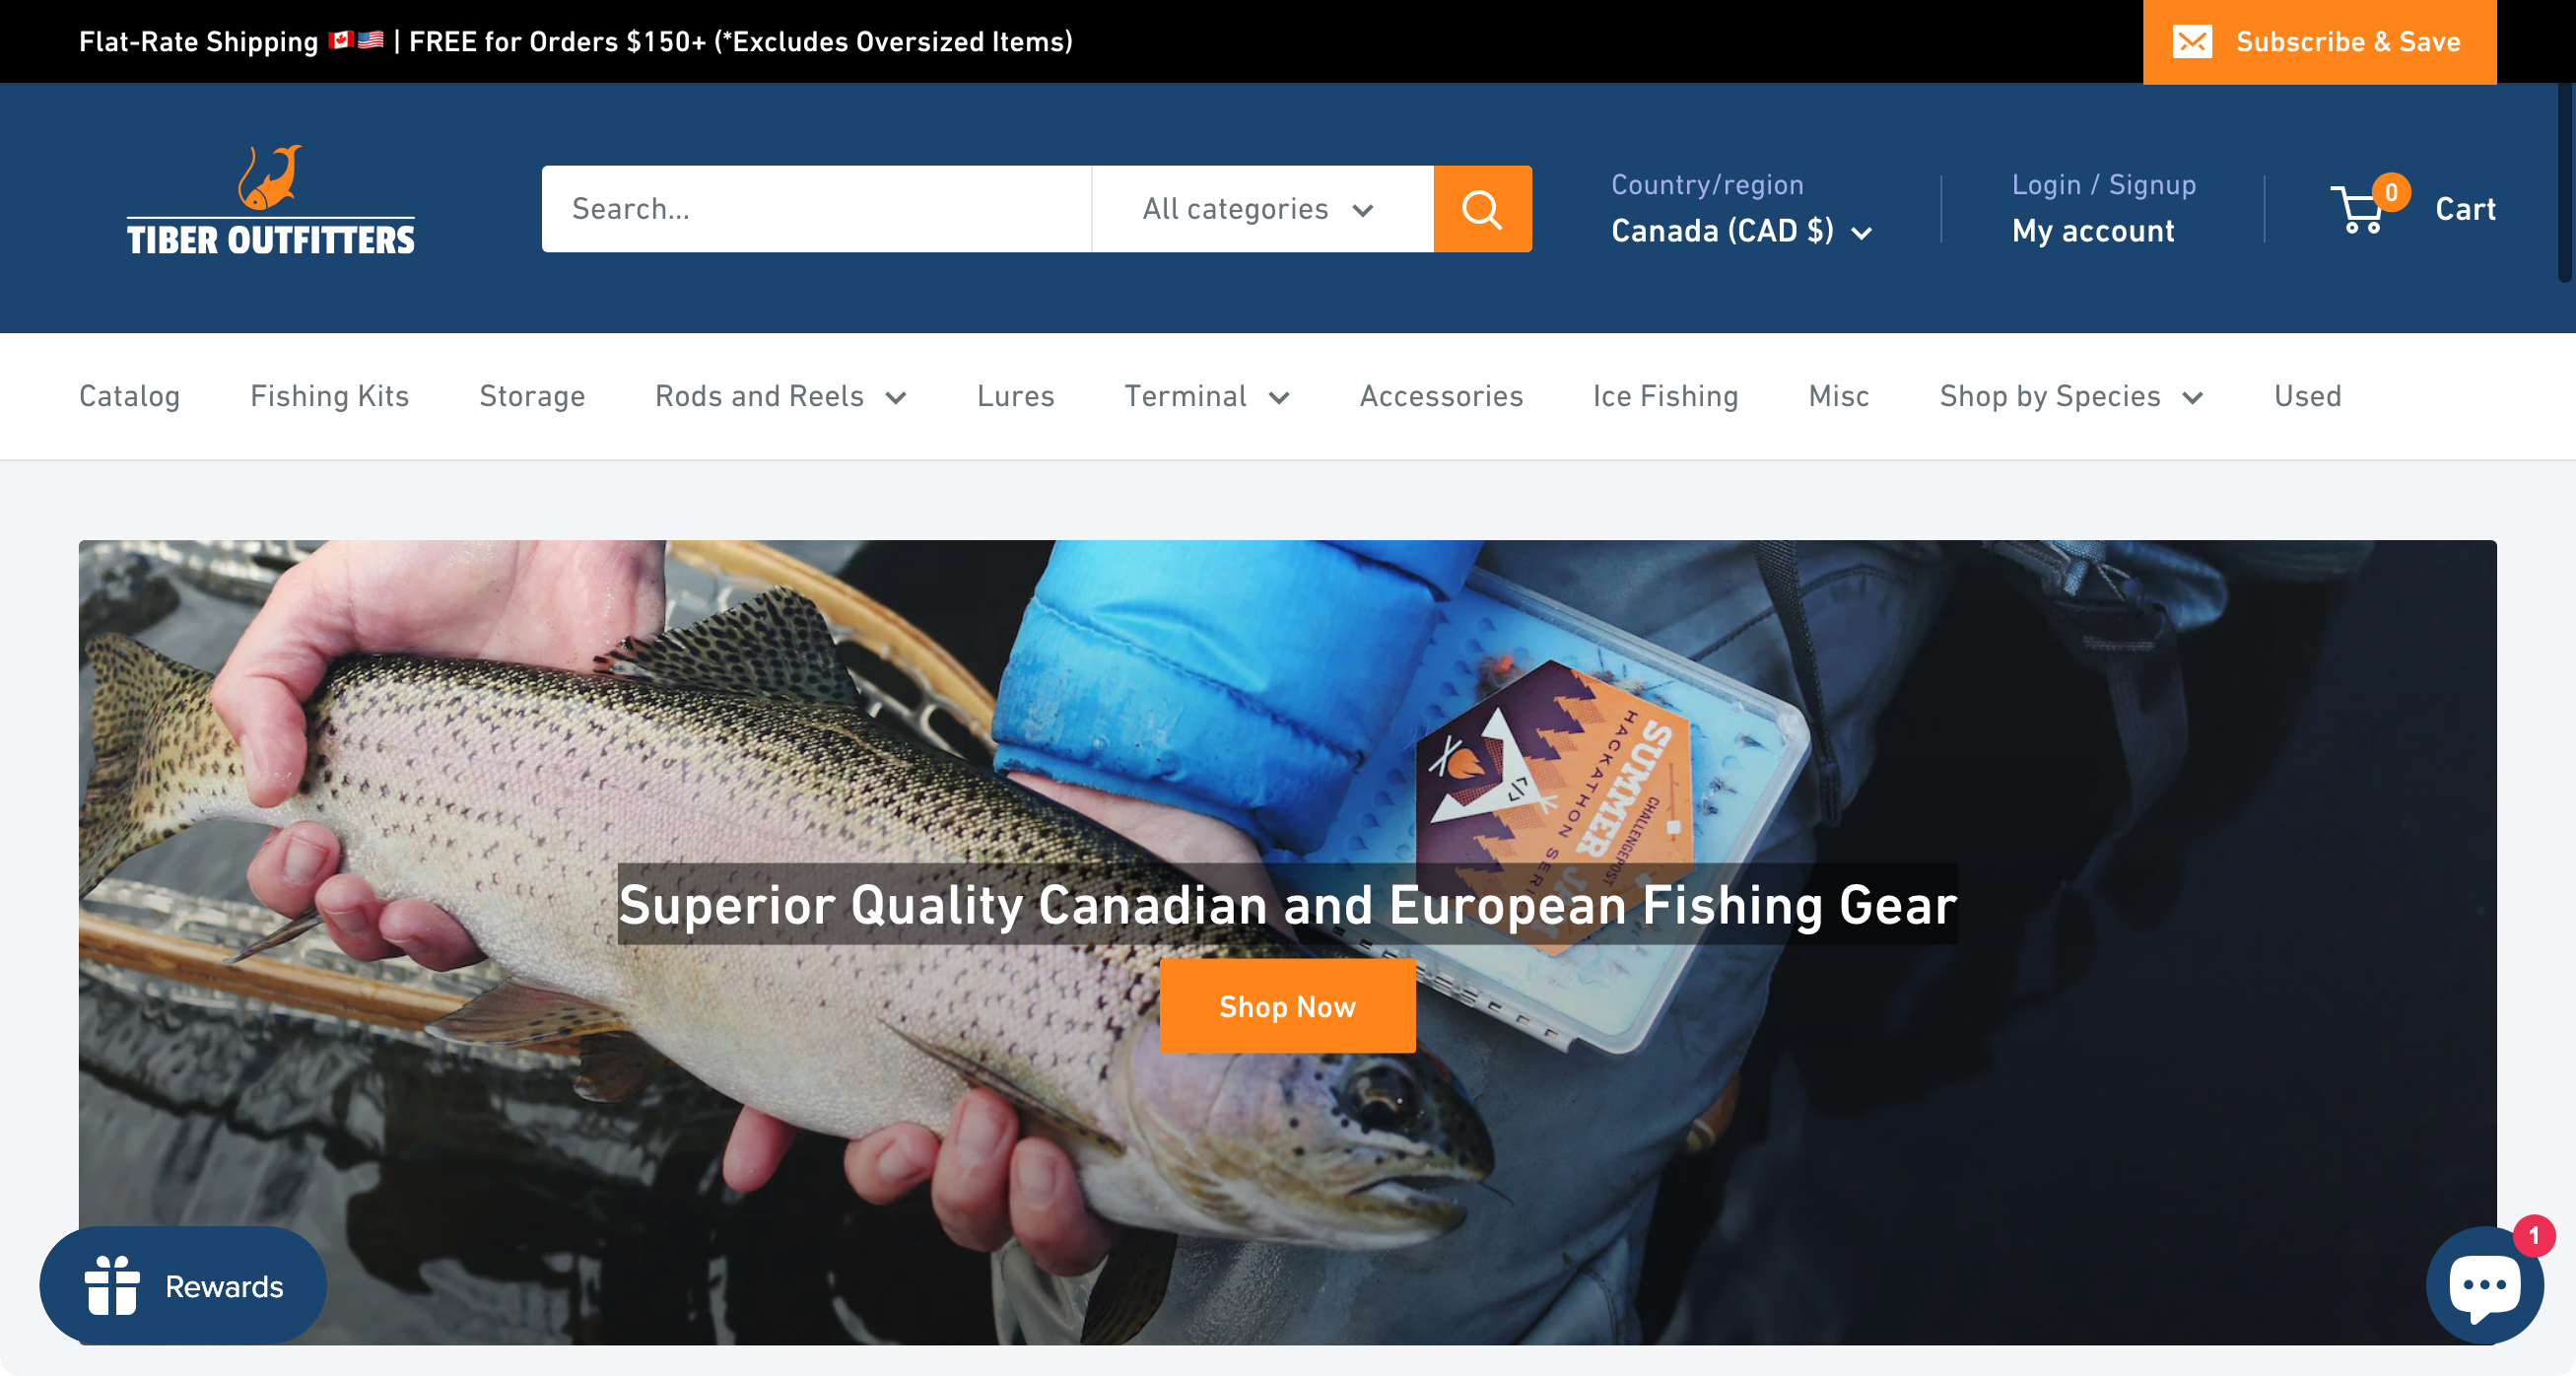 Tiber Outfitters - Superior Quality Canadian and European Fishing Gear